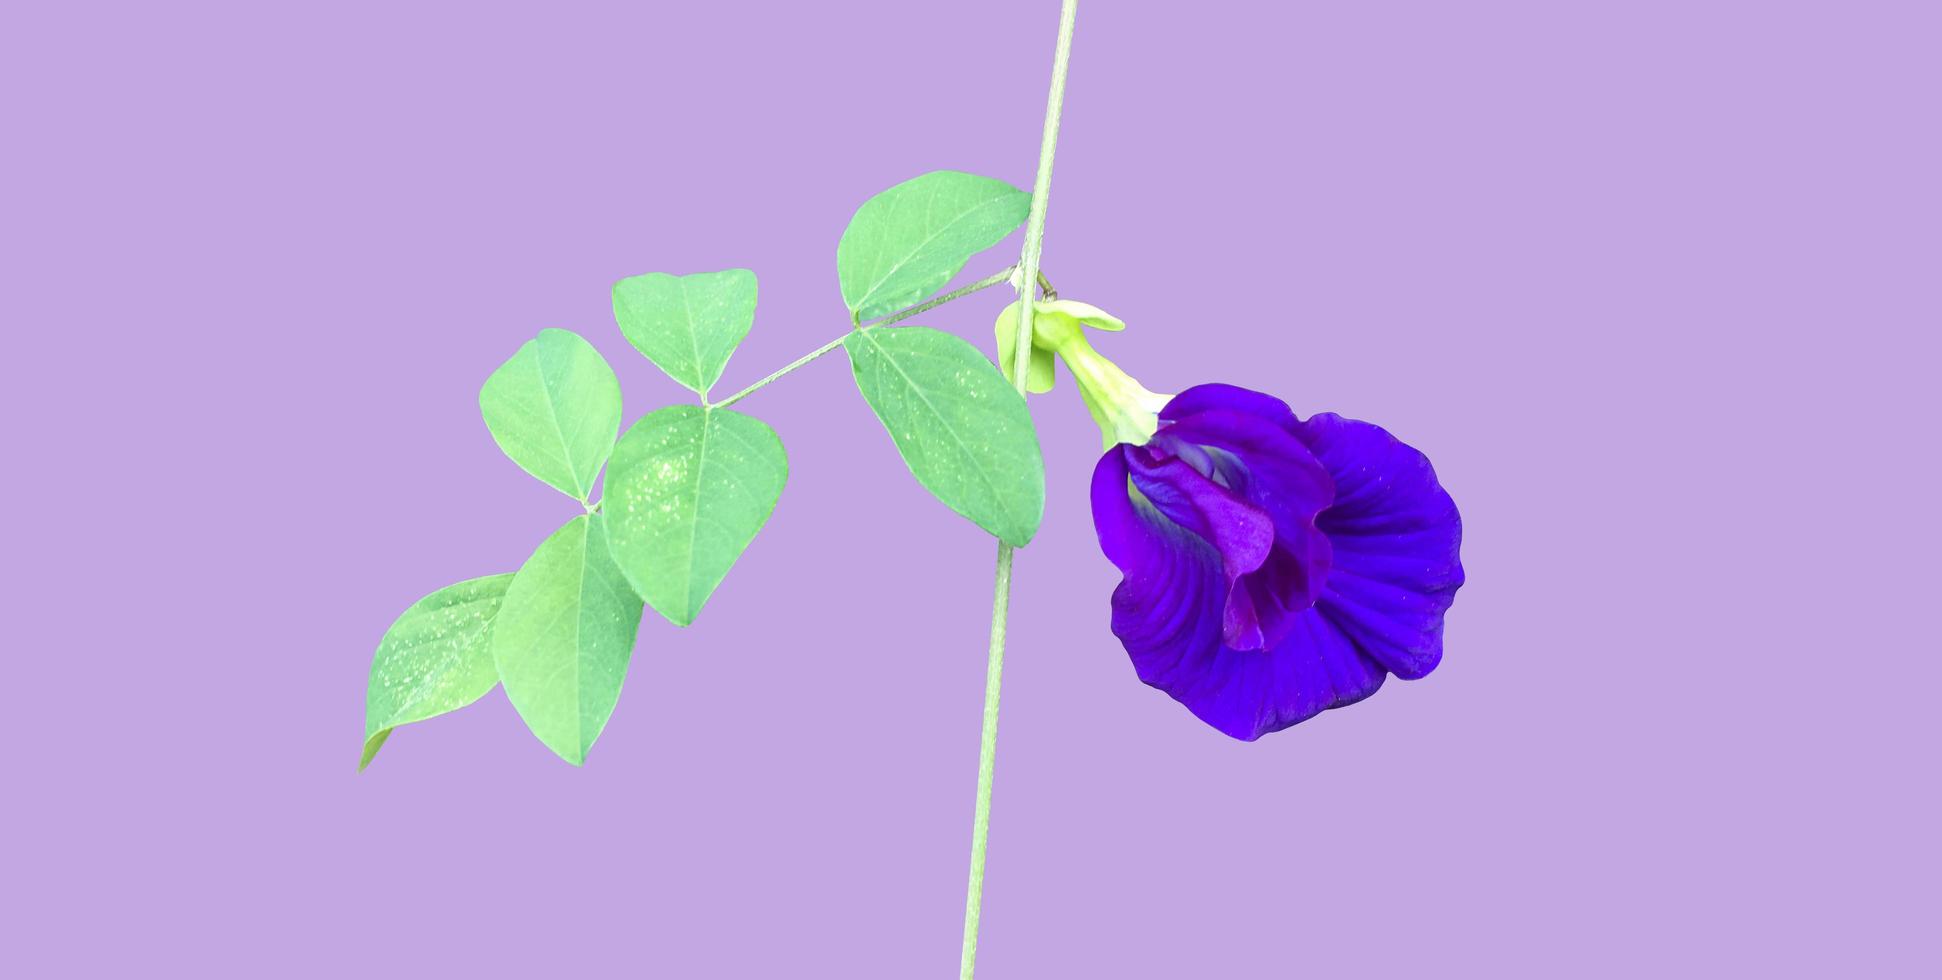 Isolated butterfly pea flower with clipping paths. photo